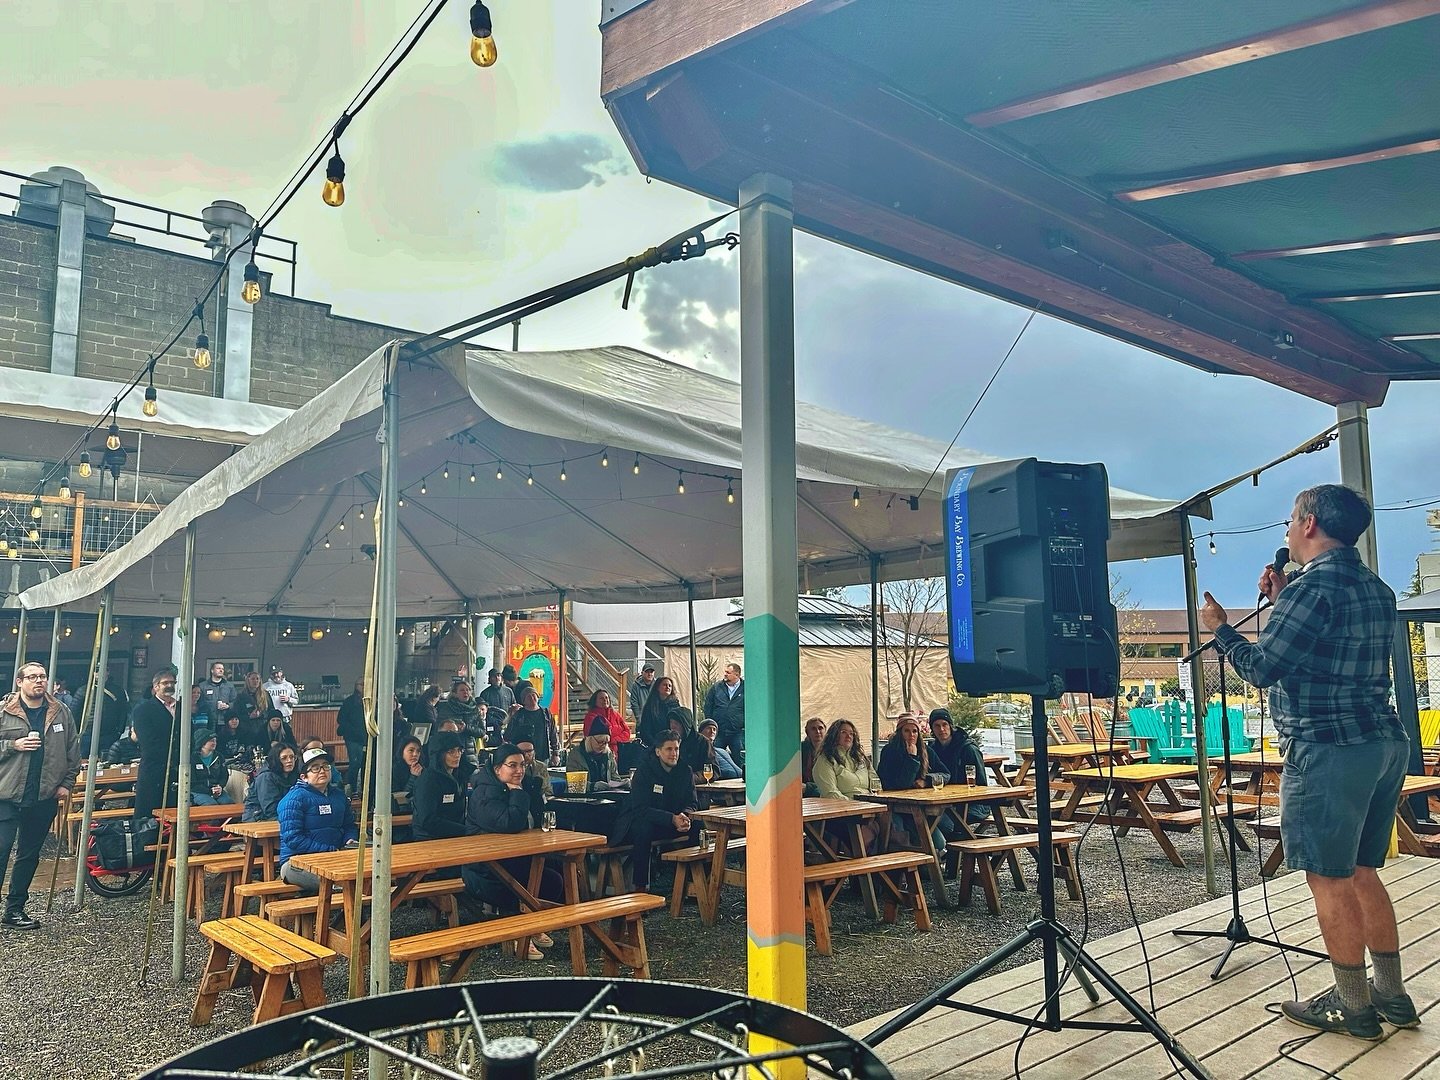 Join us tomorrow in Boundary Bay Brewery&rsquo;s beer garden from 5:30-7pm for a Downtown Neighborhood Meeting featuring Mayor Kim Lund and other leaders from the City of Bellingham! 

This meeting will discuss the status of Mayor Lund&rsquo;s Execut